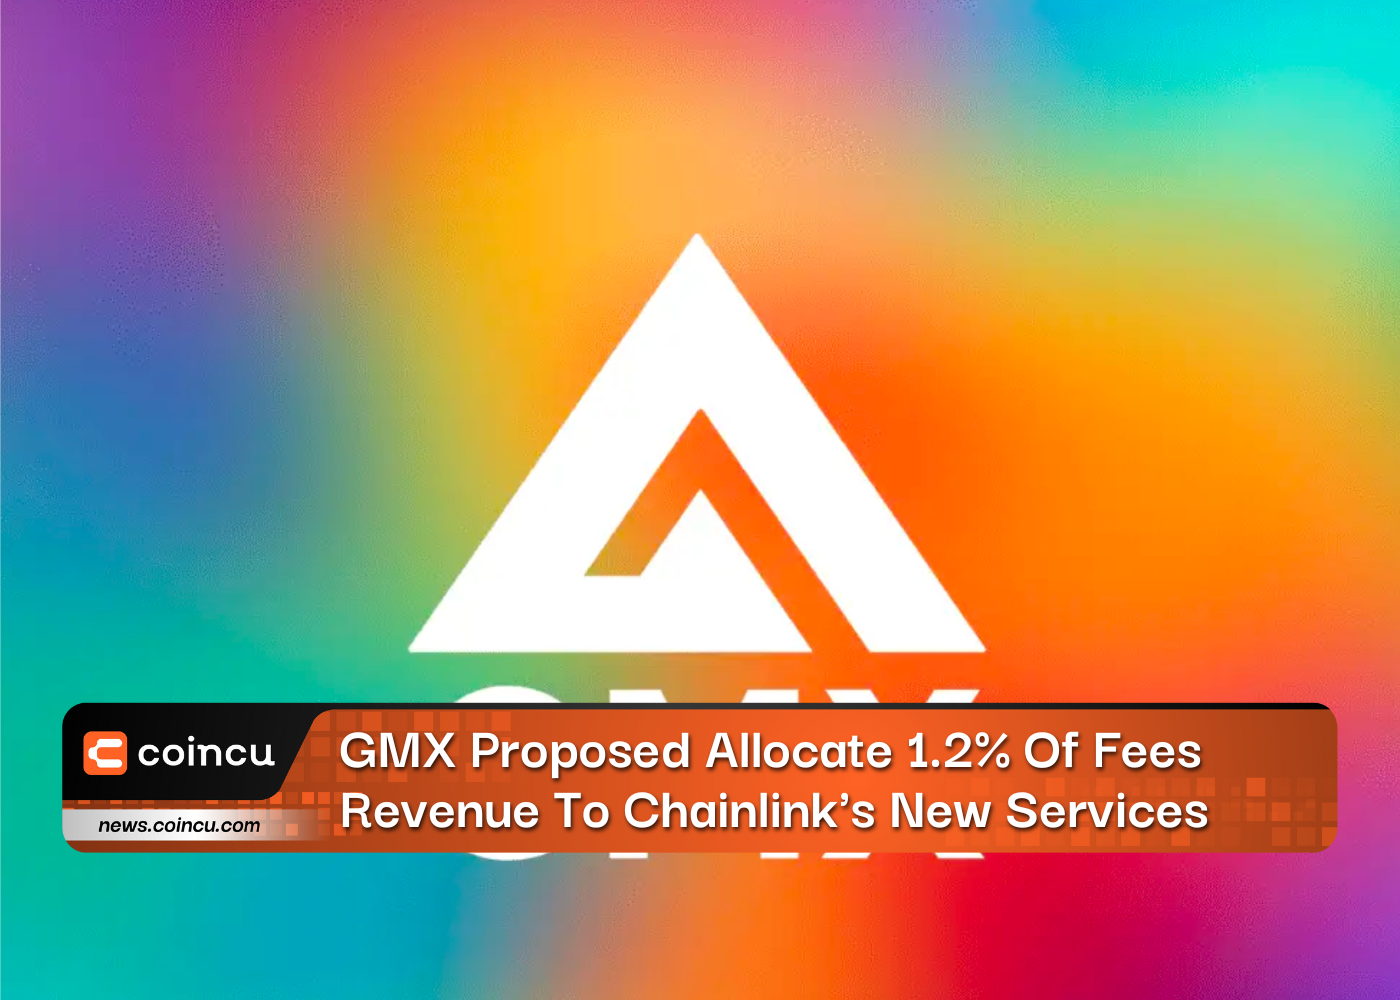 GMX Proposed Allocate 1.2% Of Fees Revenue To Chainlink's New Services